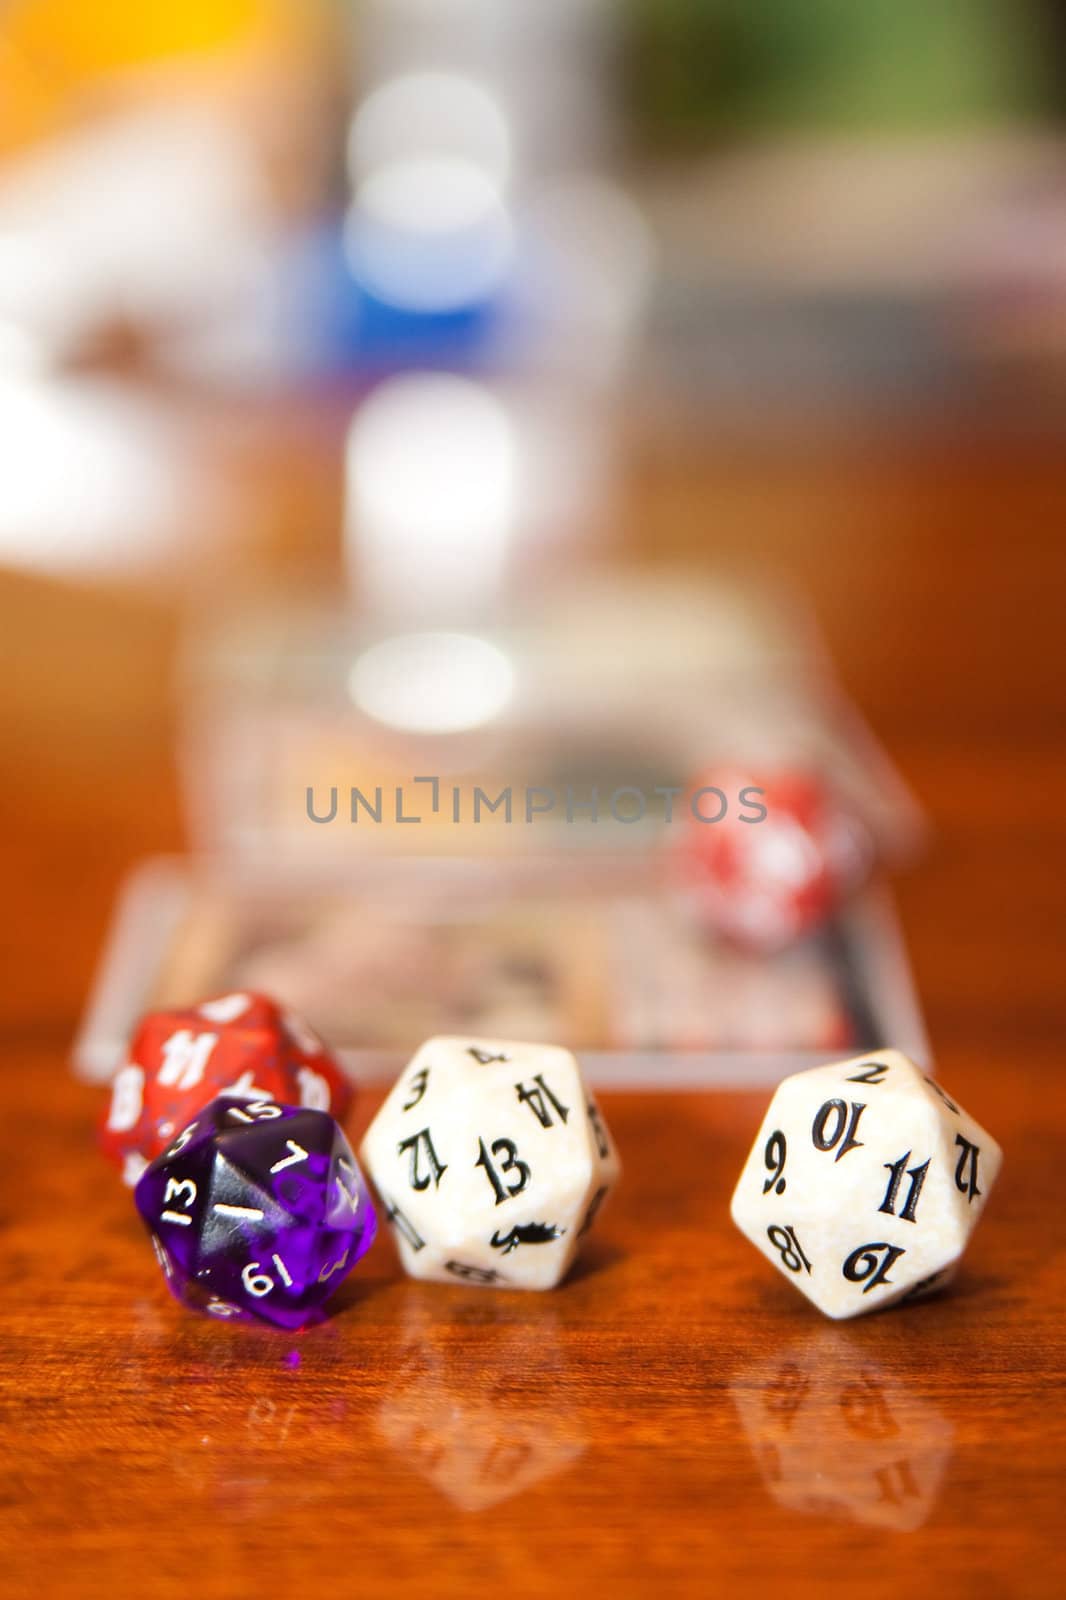 few dices with very shallow depth of field